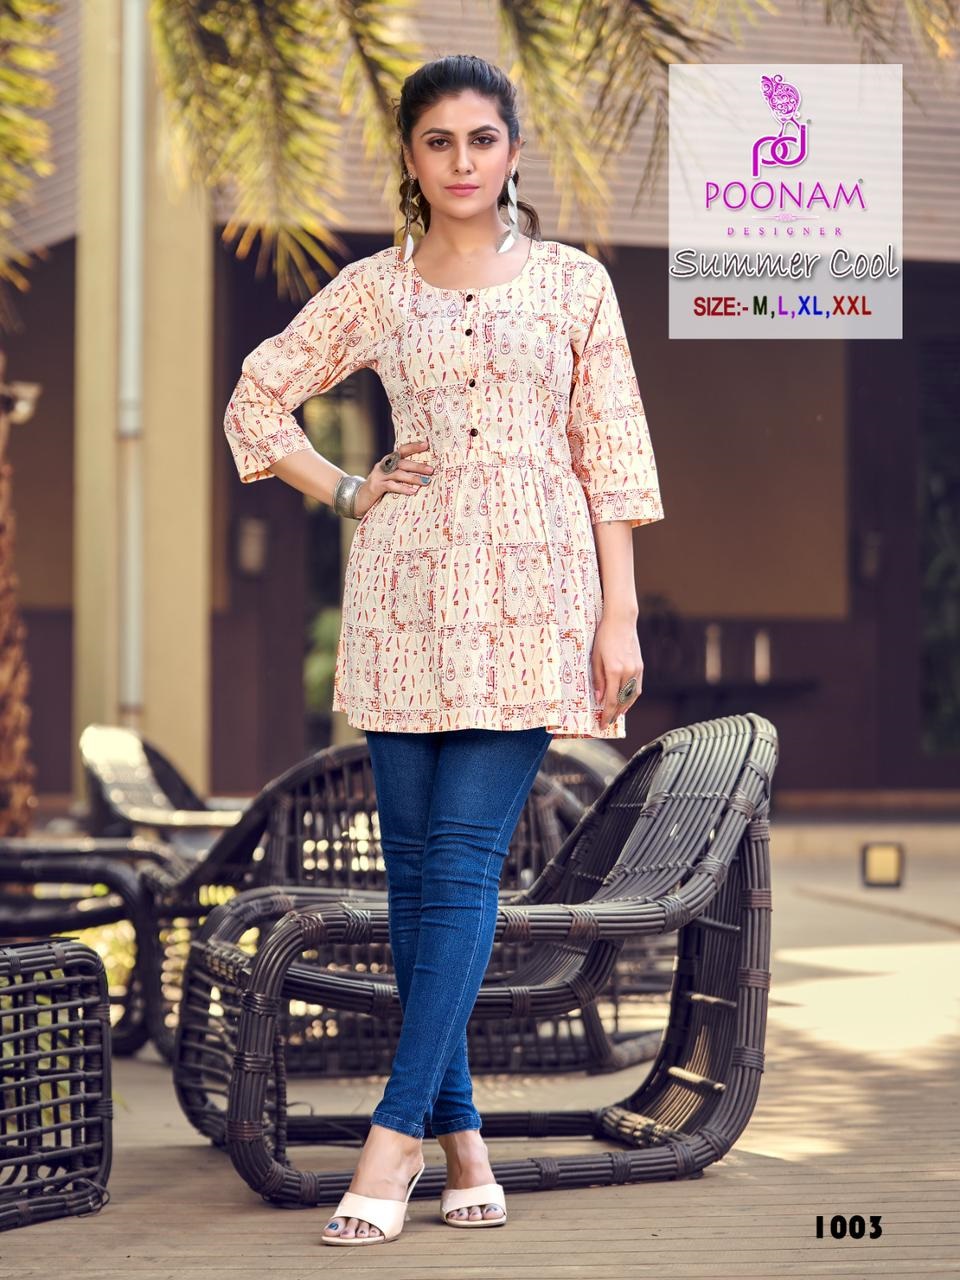 Poonam Summer Cool collection 3